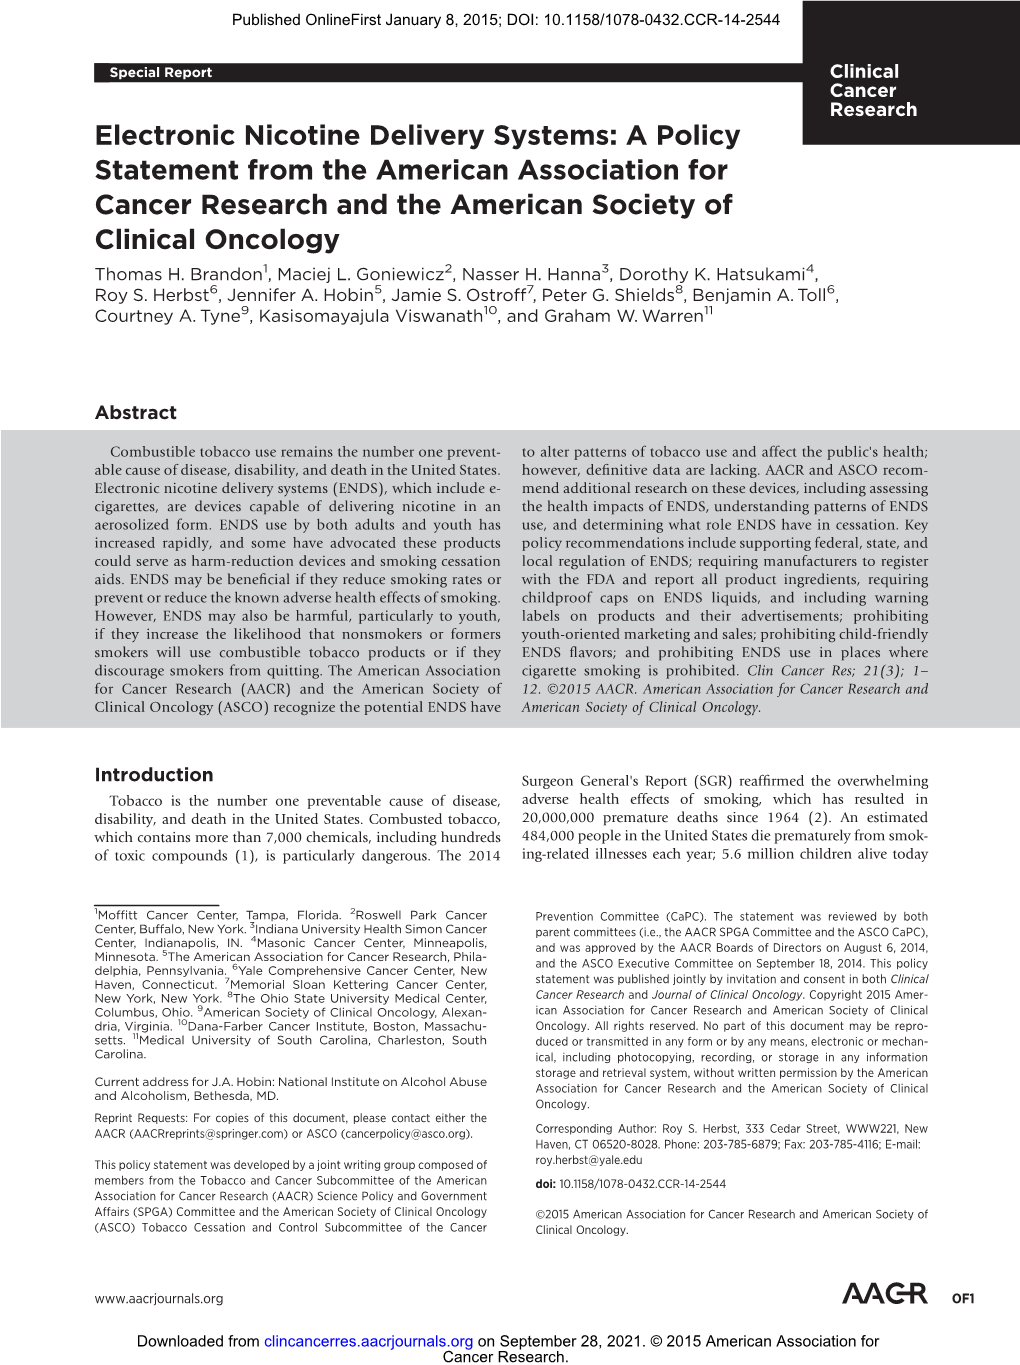 Electronic Nicotine Delivery Systems: a Policy Statement from the American Association for Cancer Research and the American Society of Clinical Oncology Thomas H